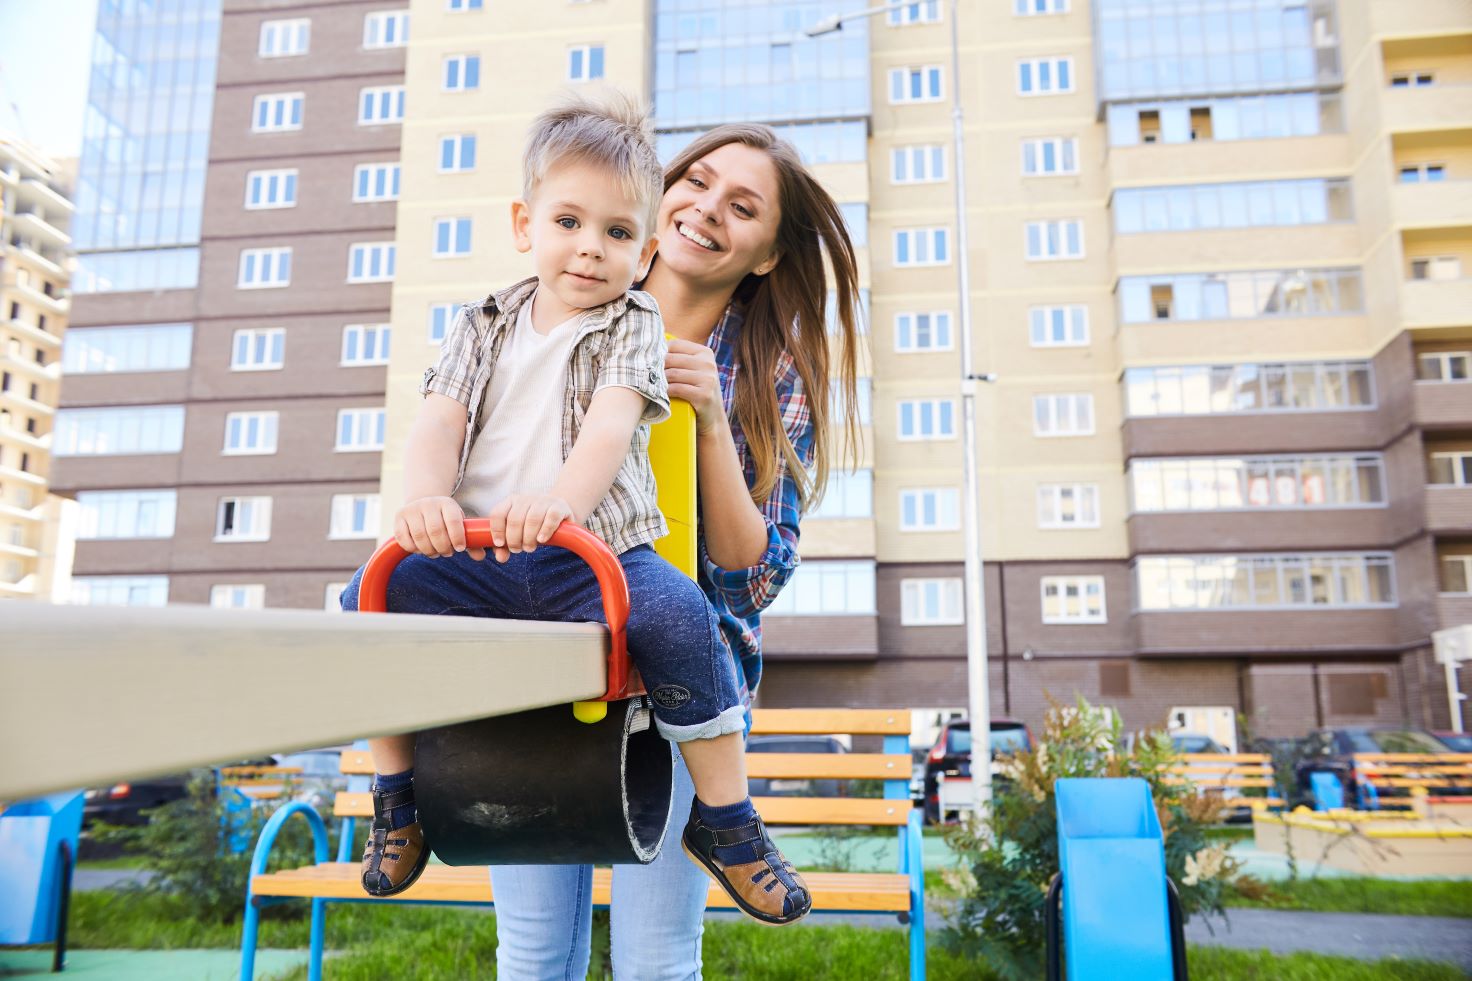 A Guide to Multi-Family Real Estate : Understanding Regulations & Inspections